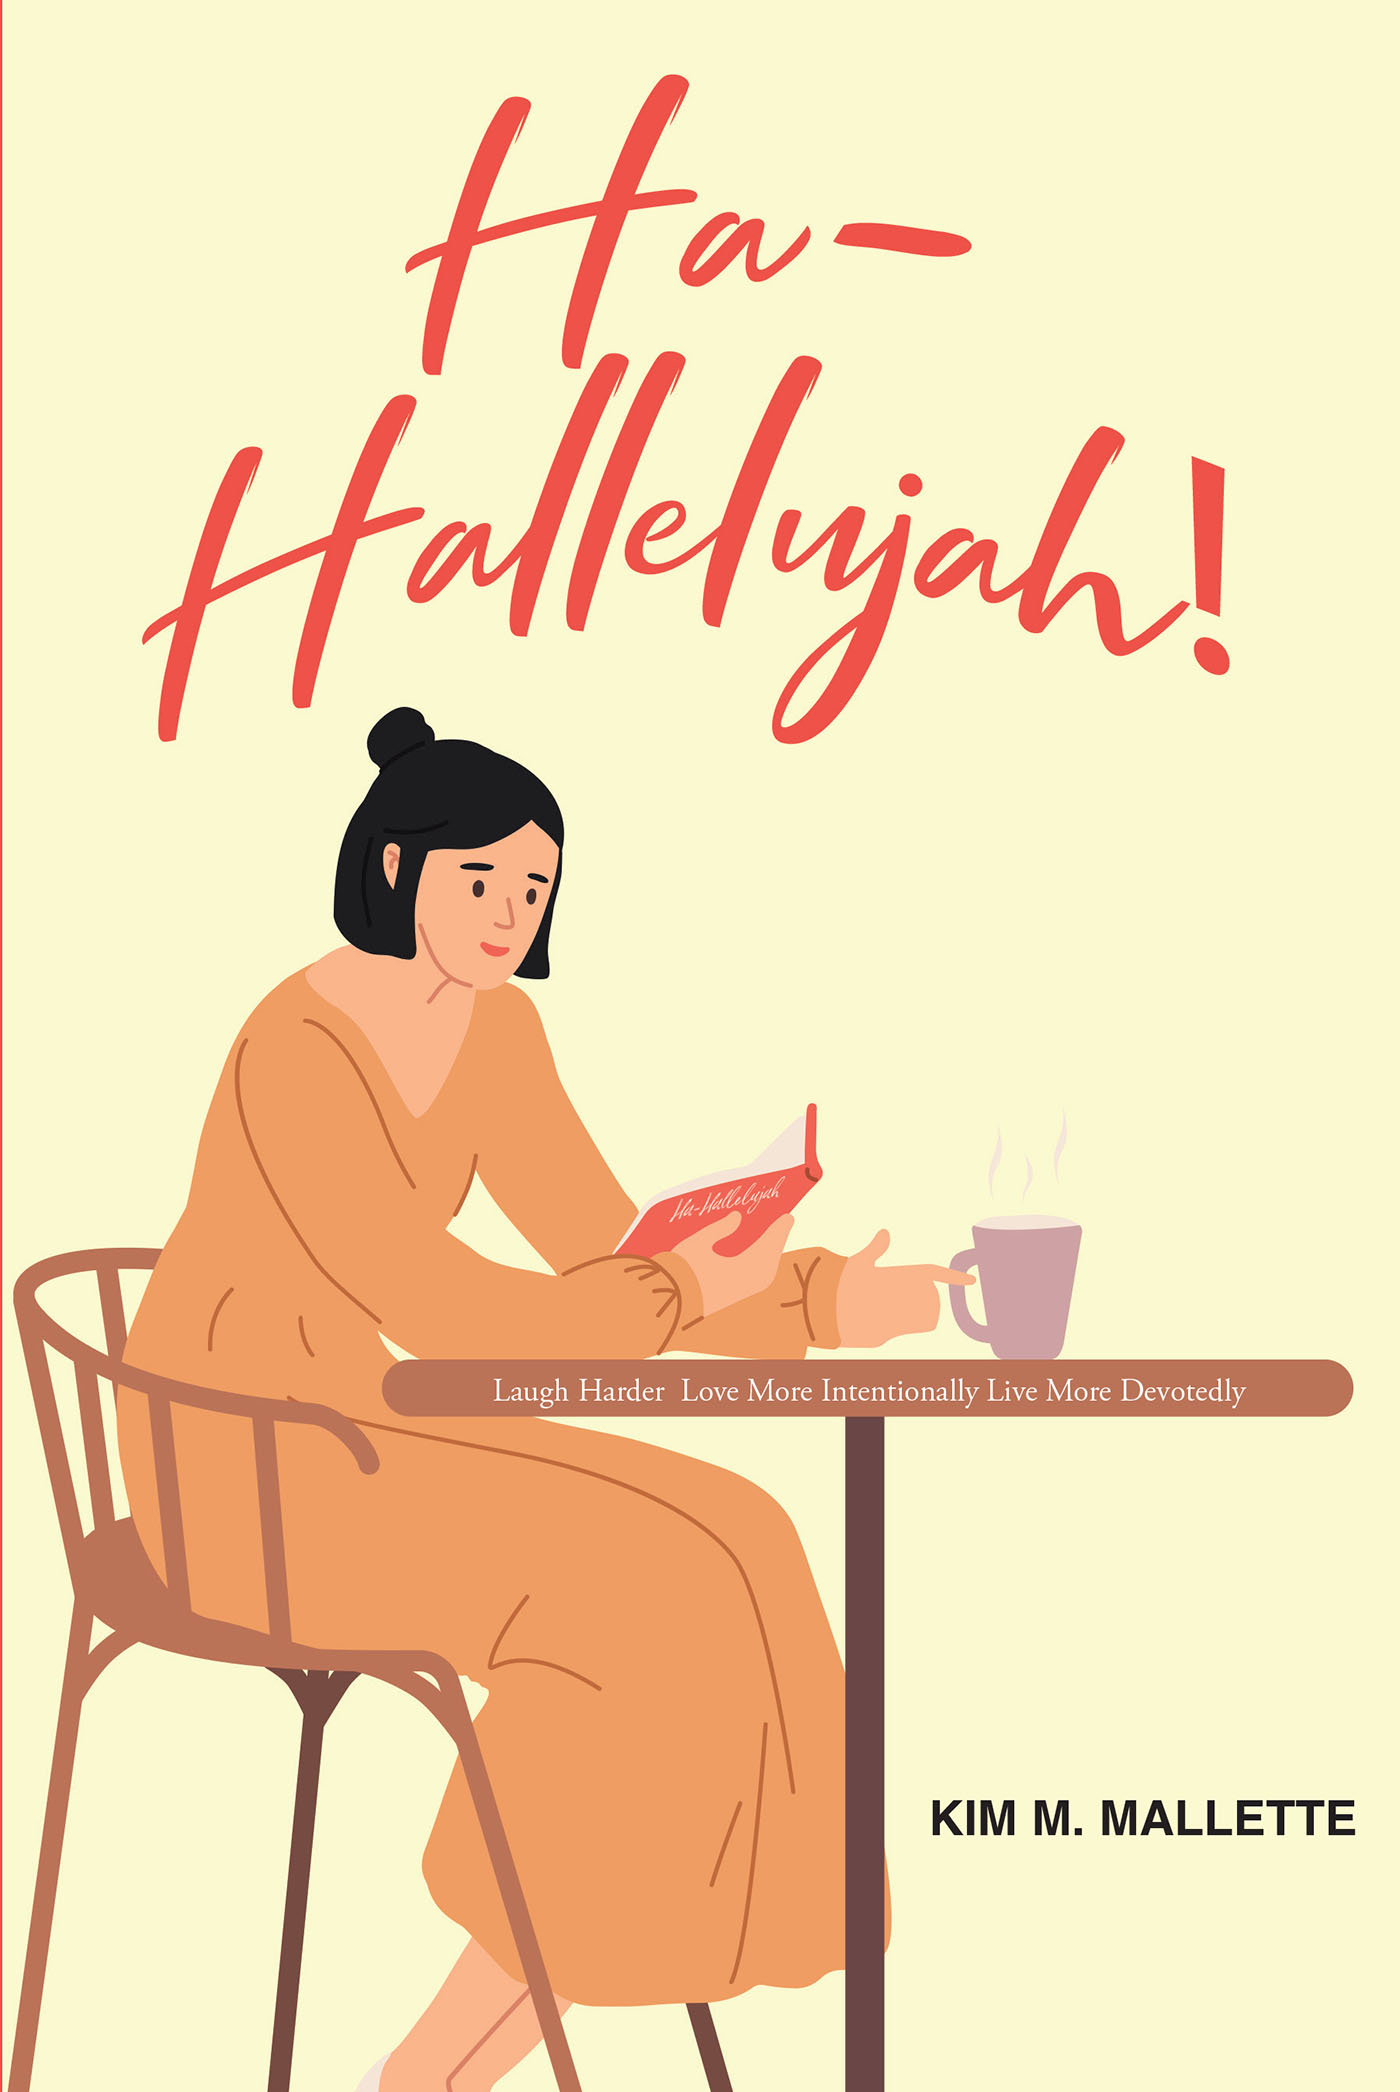 Kim M. Mallette’s Newly Released "Ha-Hallelujah! Laugh Hard Love More Intentionally Live More Devotedly" is an Uplifting Celebration of the Joys of Life and Faith